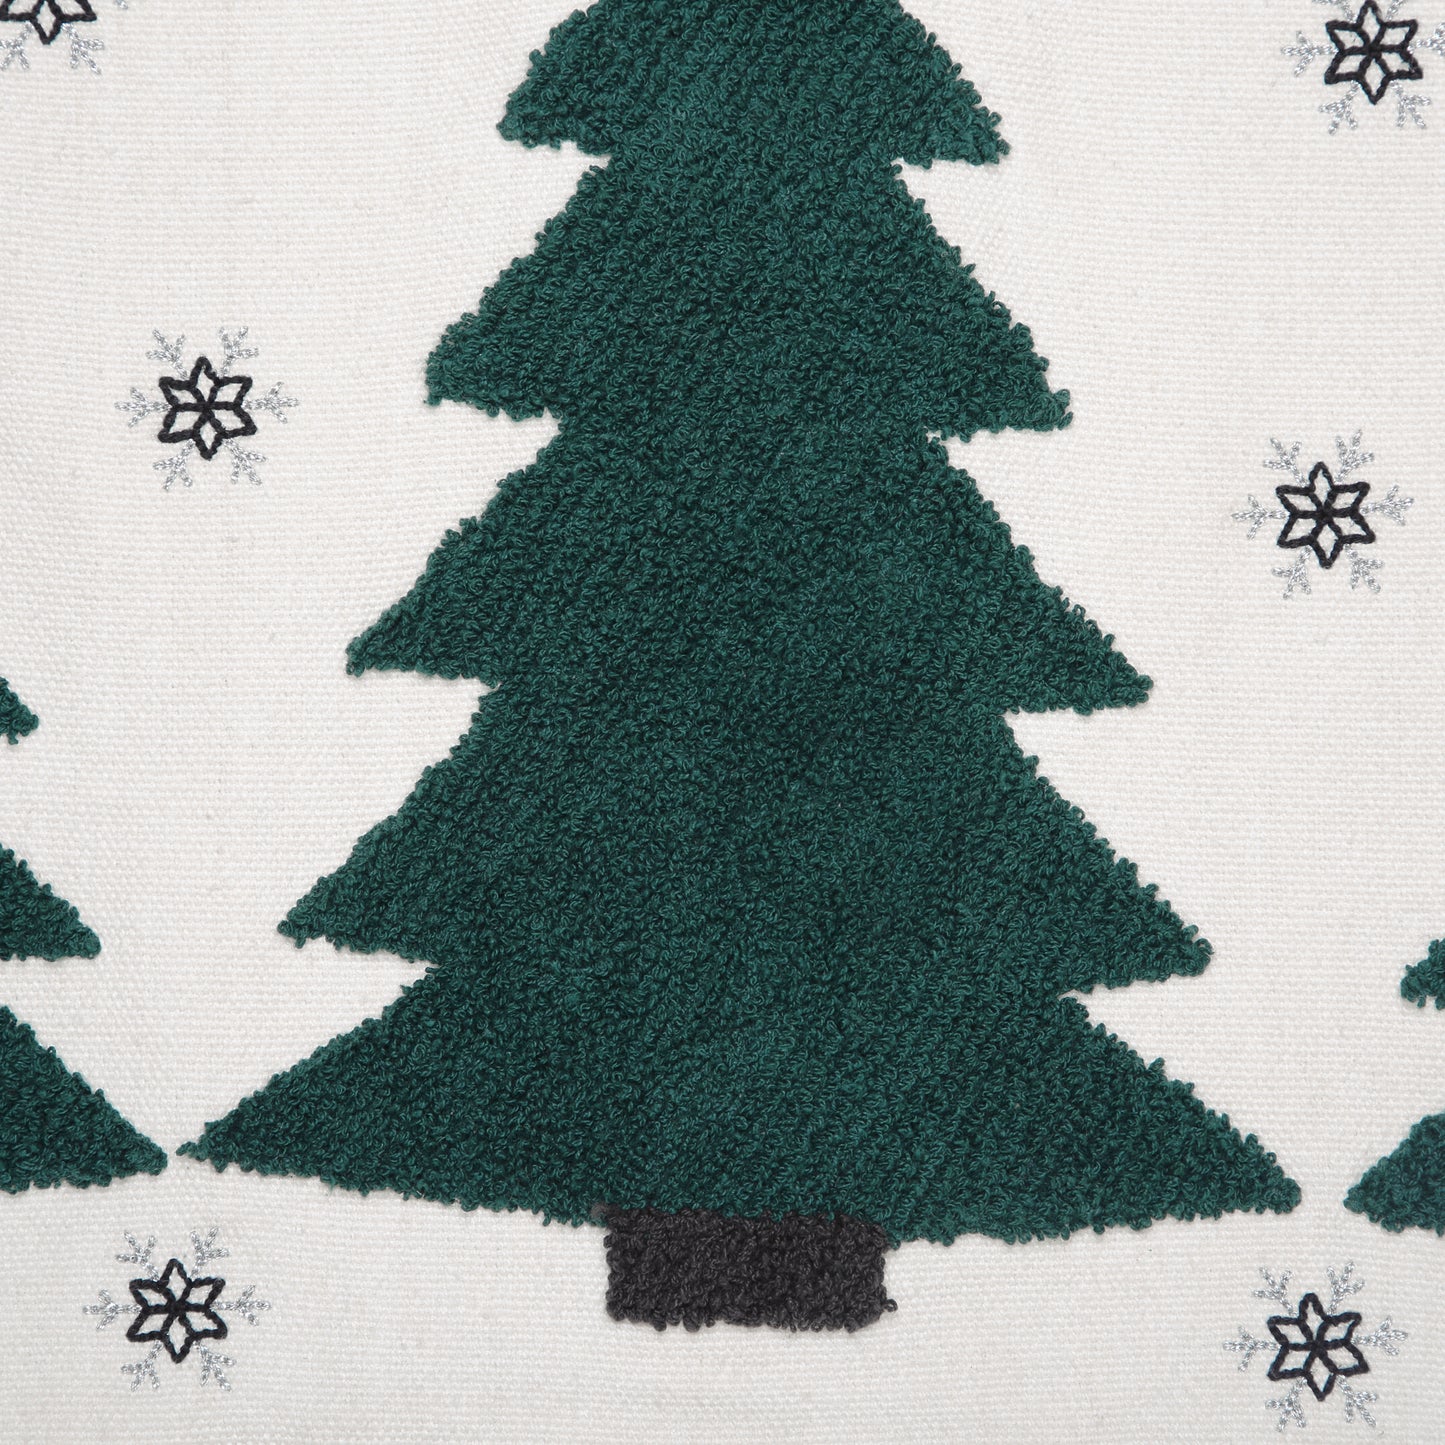 80425-Pine-Grove-Plaid-Embroidered-Trees-Pillow-Cover-14x22-image-5